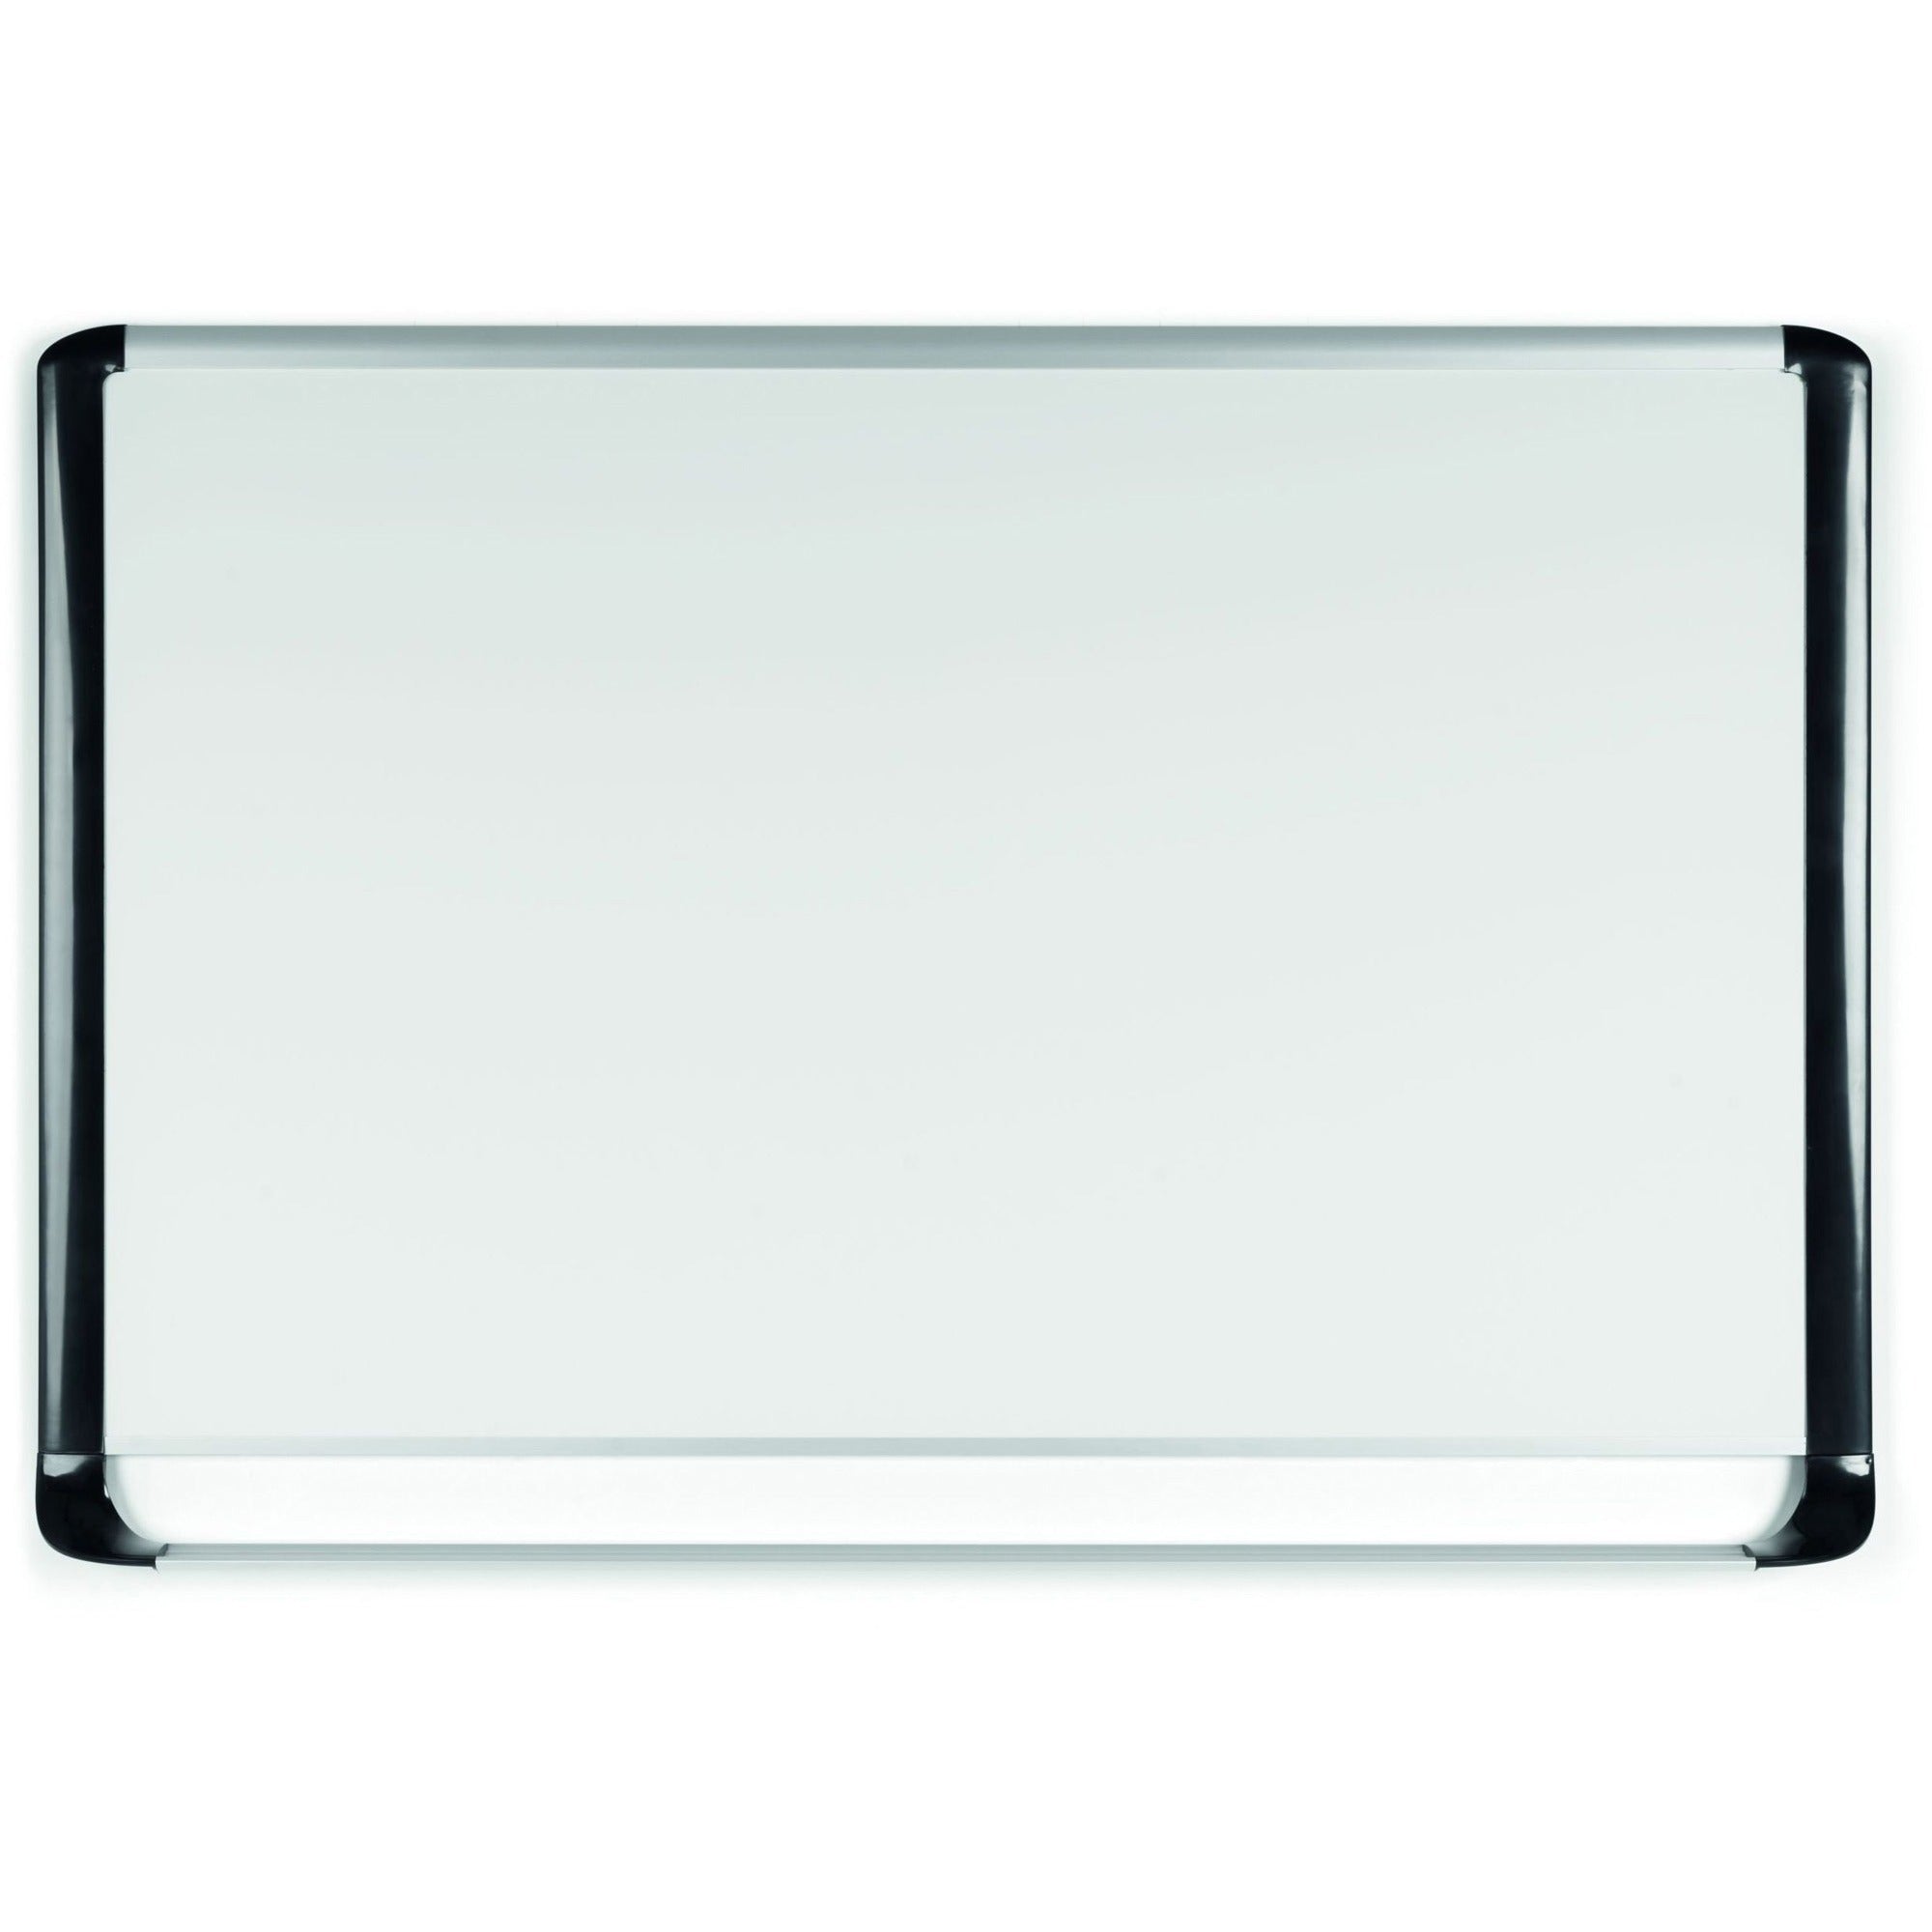 MasterVision MVI Platinum Plus Dry-erase Board - 72" (6 ft) Width x 48" (4 ft) Height - White Porcelain Surface - Silver/Black Aluminum/Plastic Frame - Rectangle - Magnetic - Scratch Resistant, Ghost Resistant, Marker Tray, Sturdy - Assembly Required - 